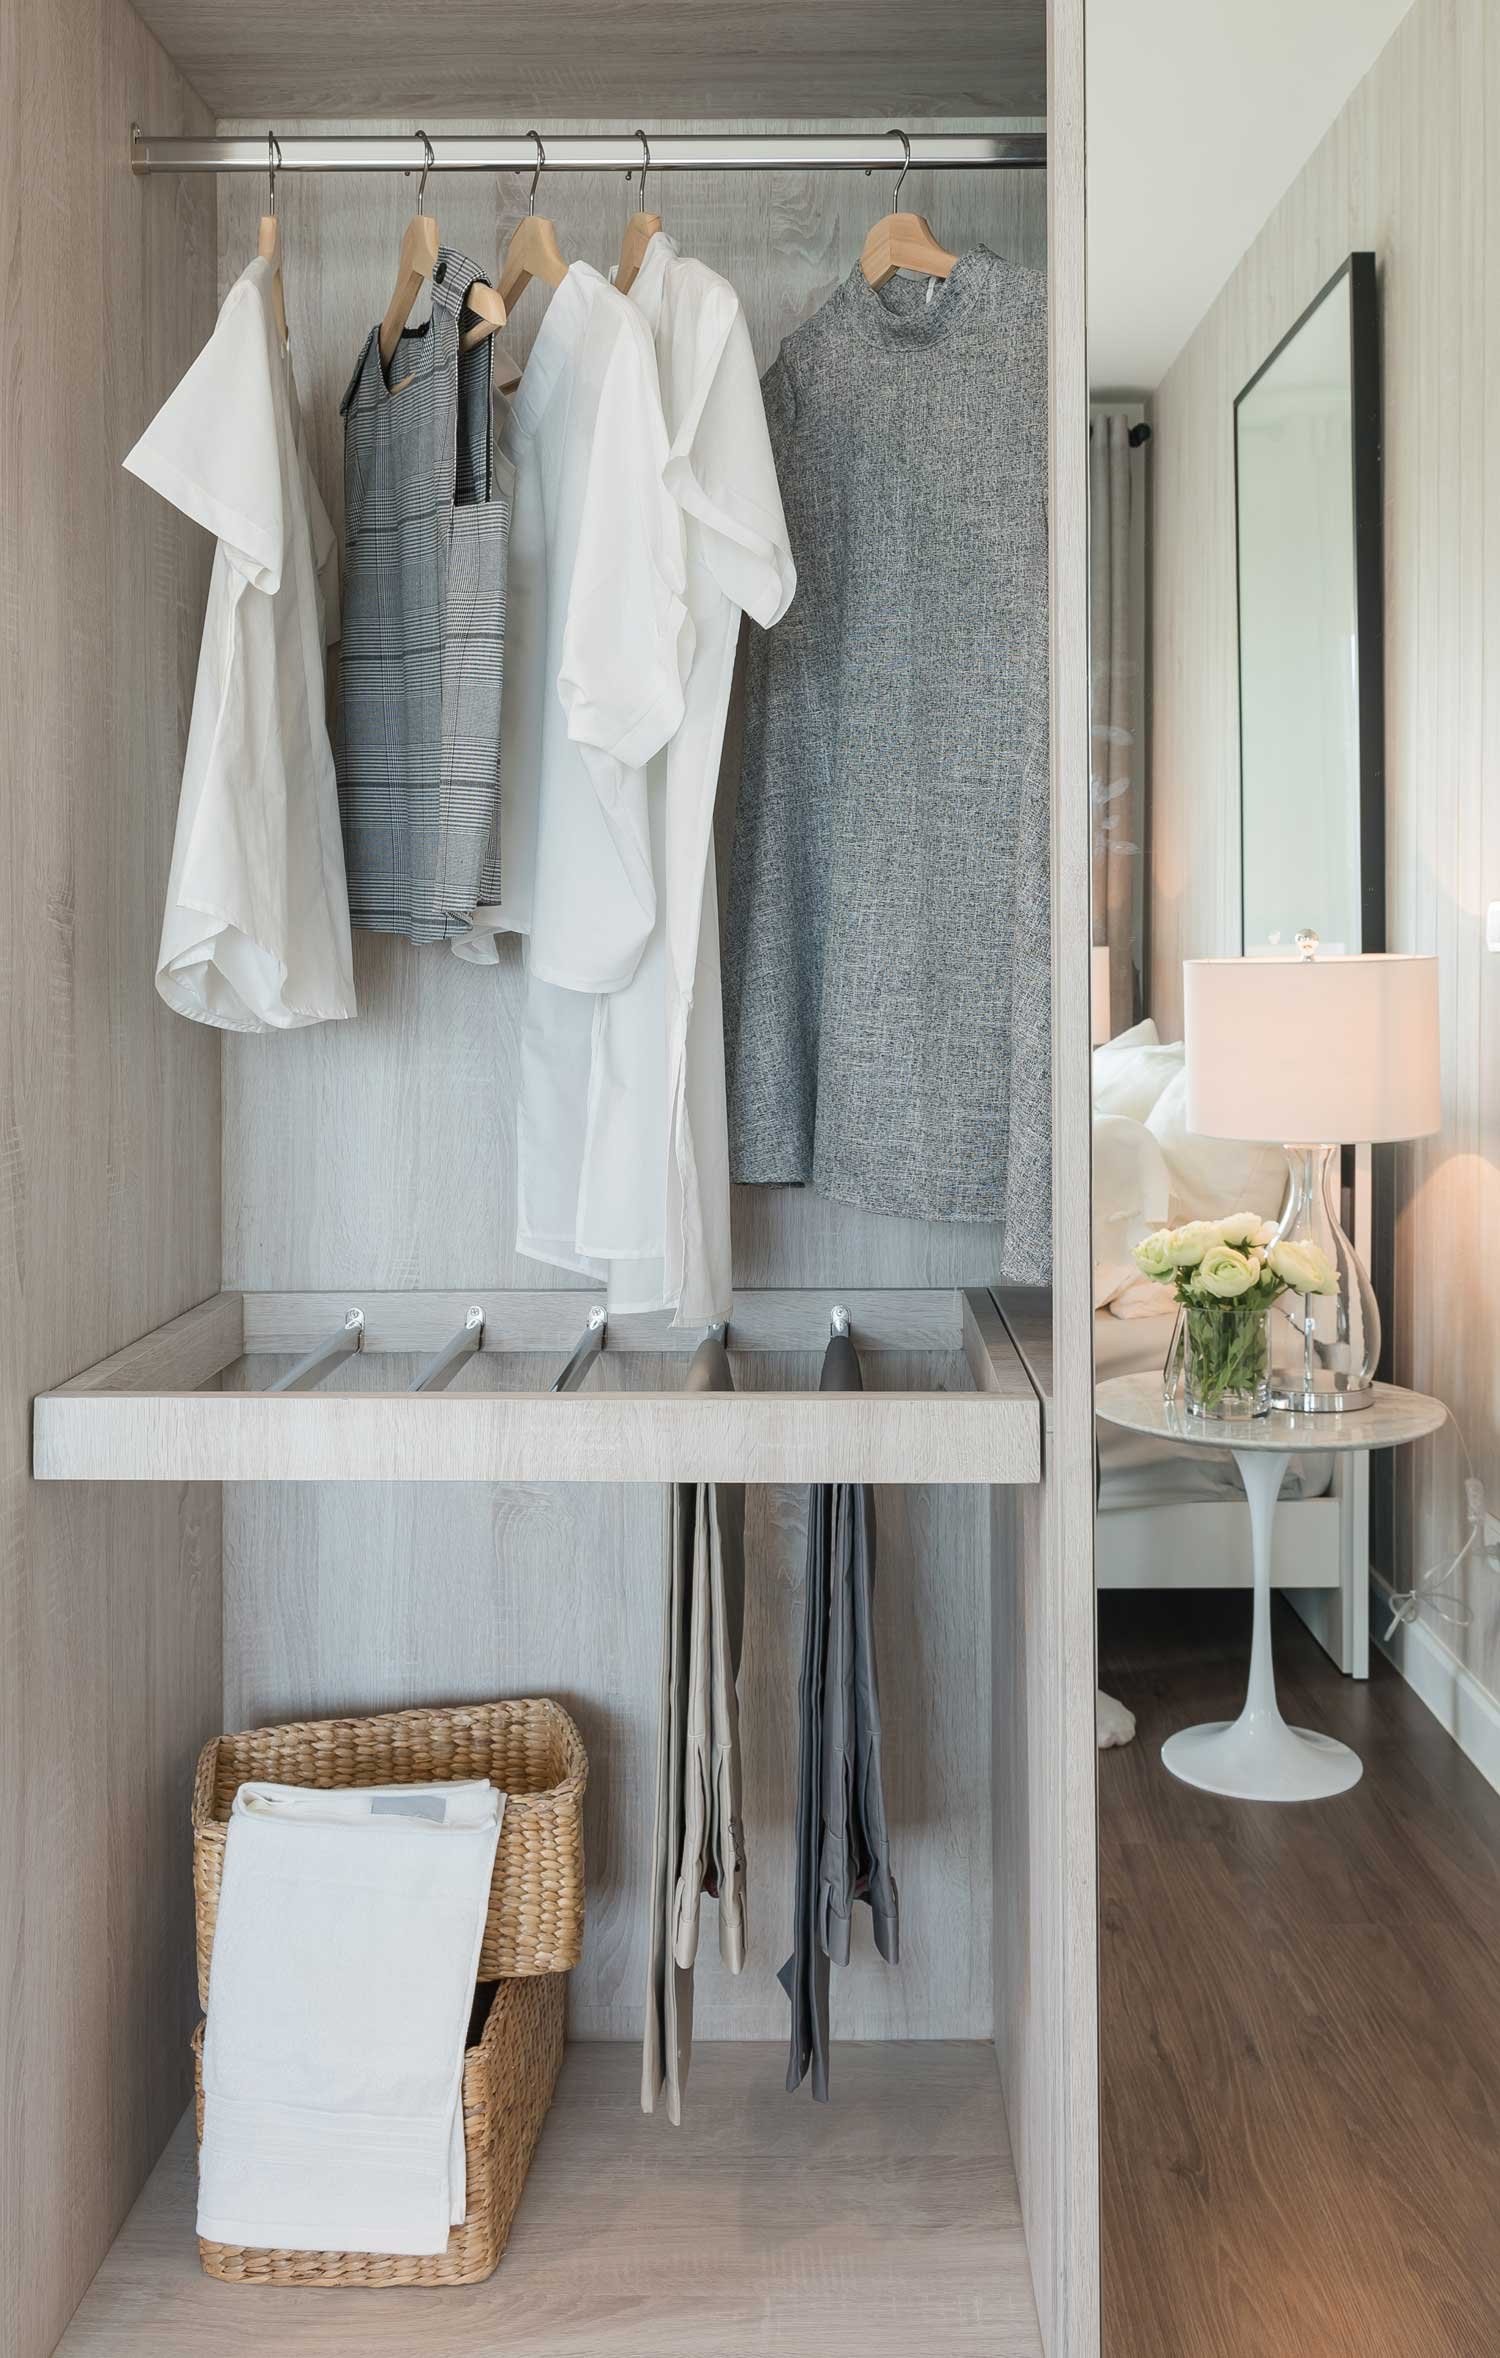 Design + Organizing Considerations For Your Walk-In Closet